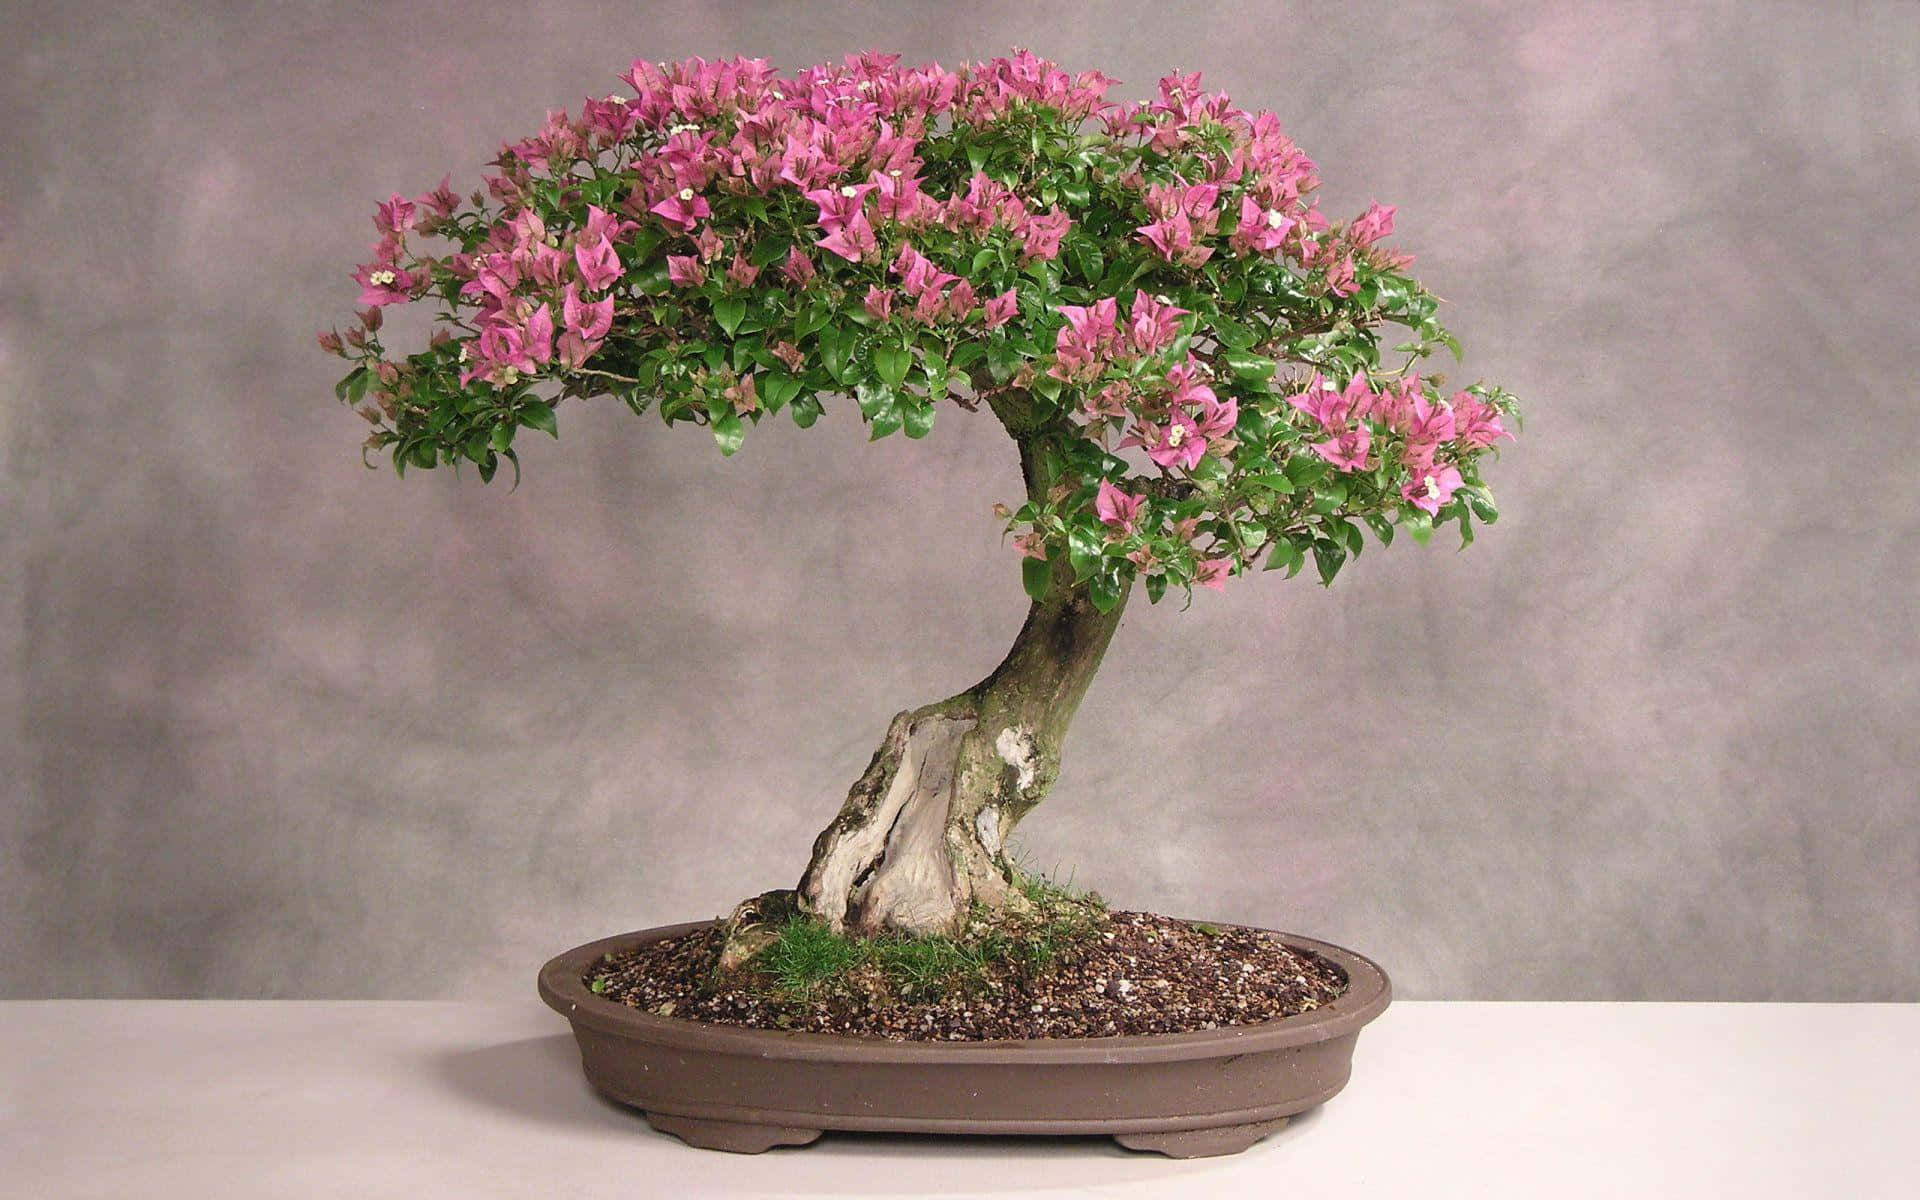 "This Traditional Bonsai Tree is a Work of Art"